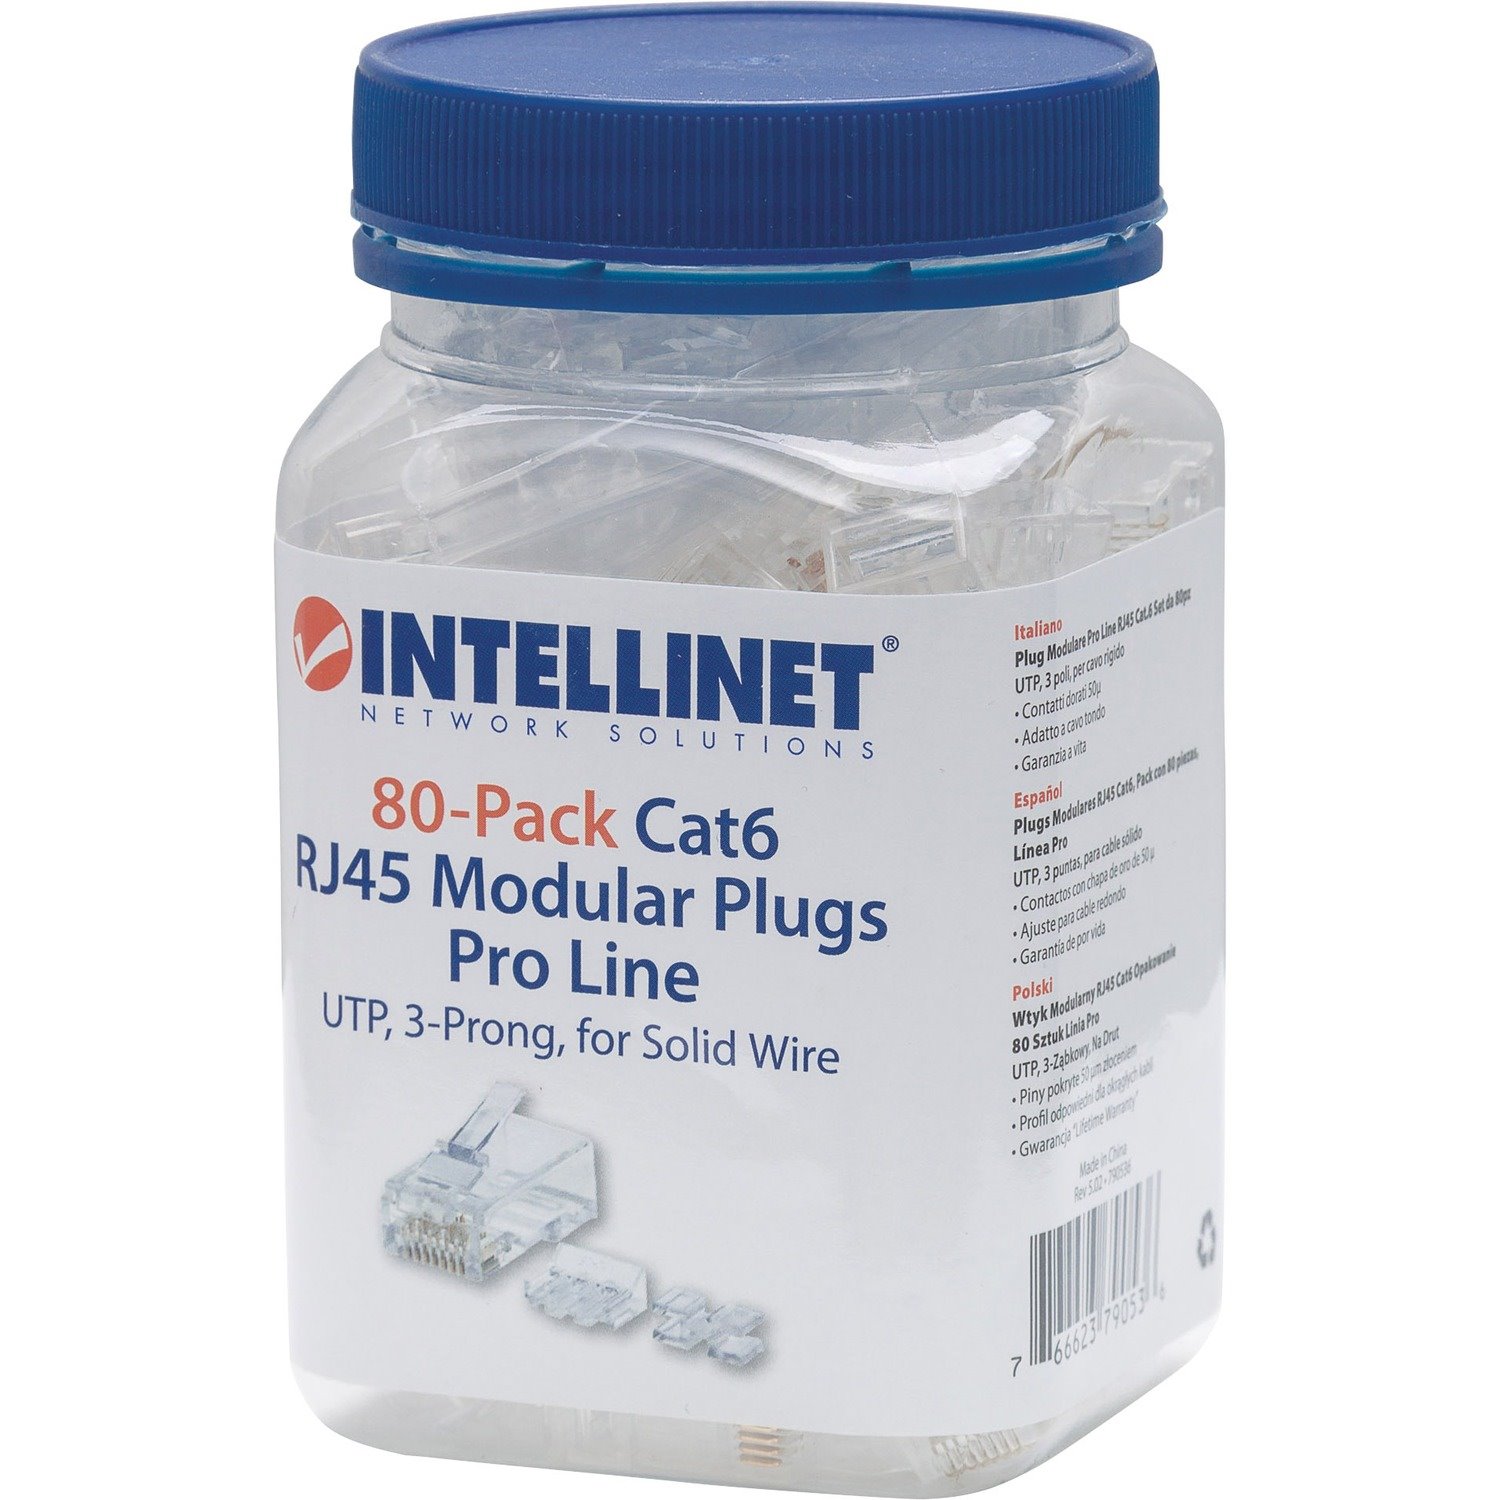 Intellinet Network Solutions Cat6 RJ45 Modular Plugs, 3-Prong, UTP, For Solid Wire, 80 Plugs, Liners and Sleds in Jar